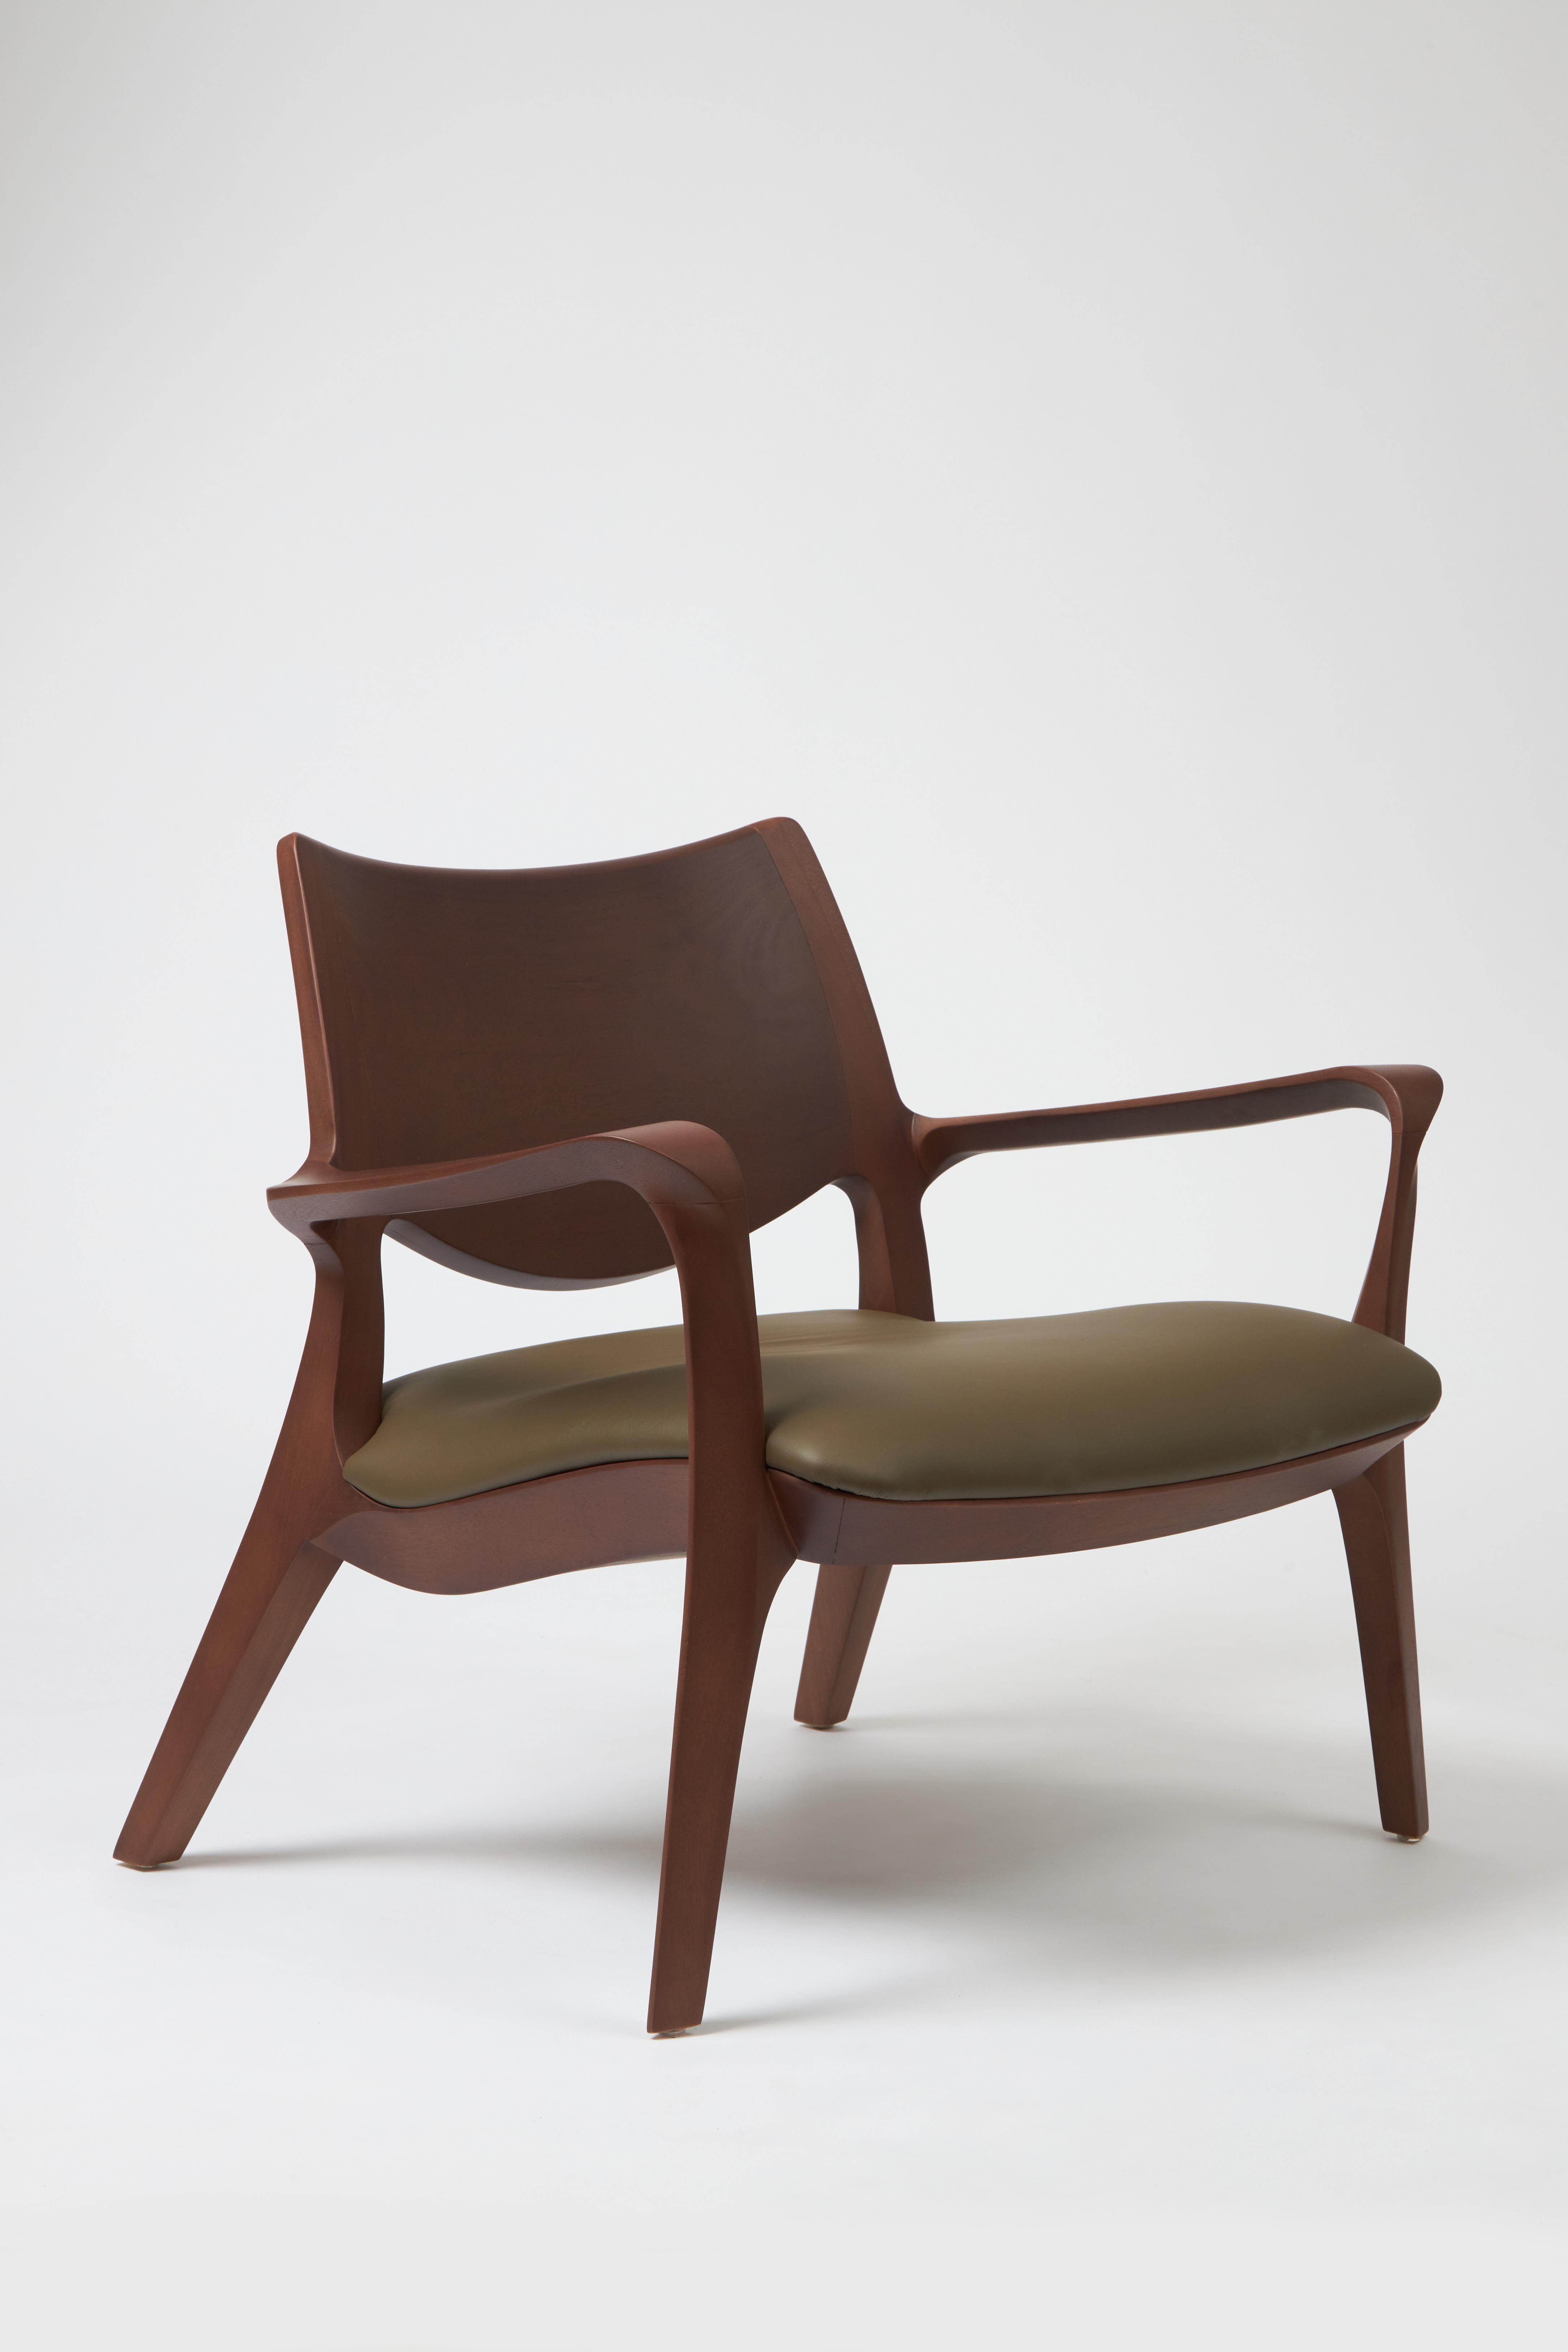 Contemporary Modern Style Aurora armchair Sculpted in solid wood, leather seat and back For Sale